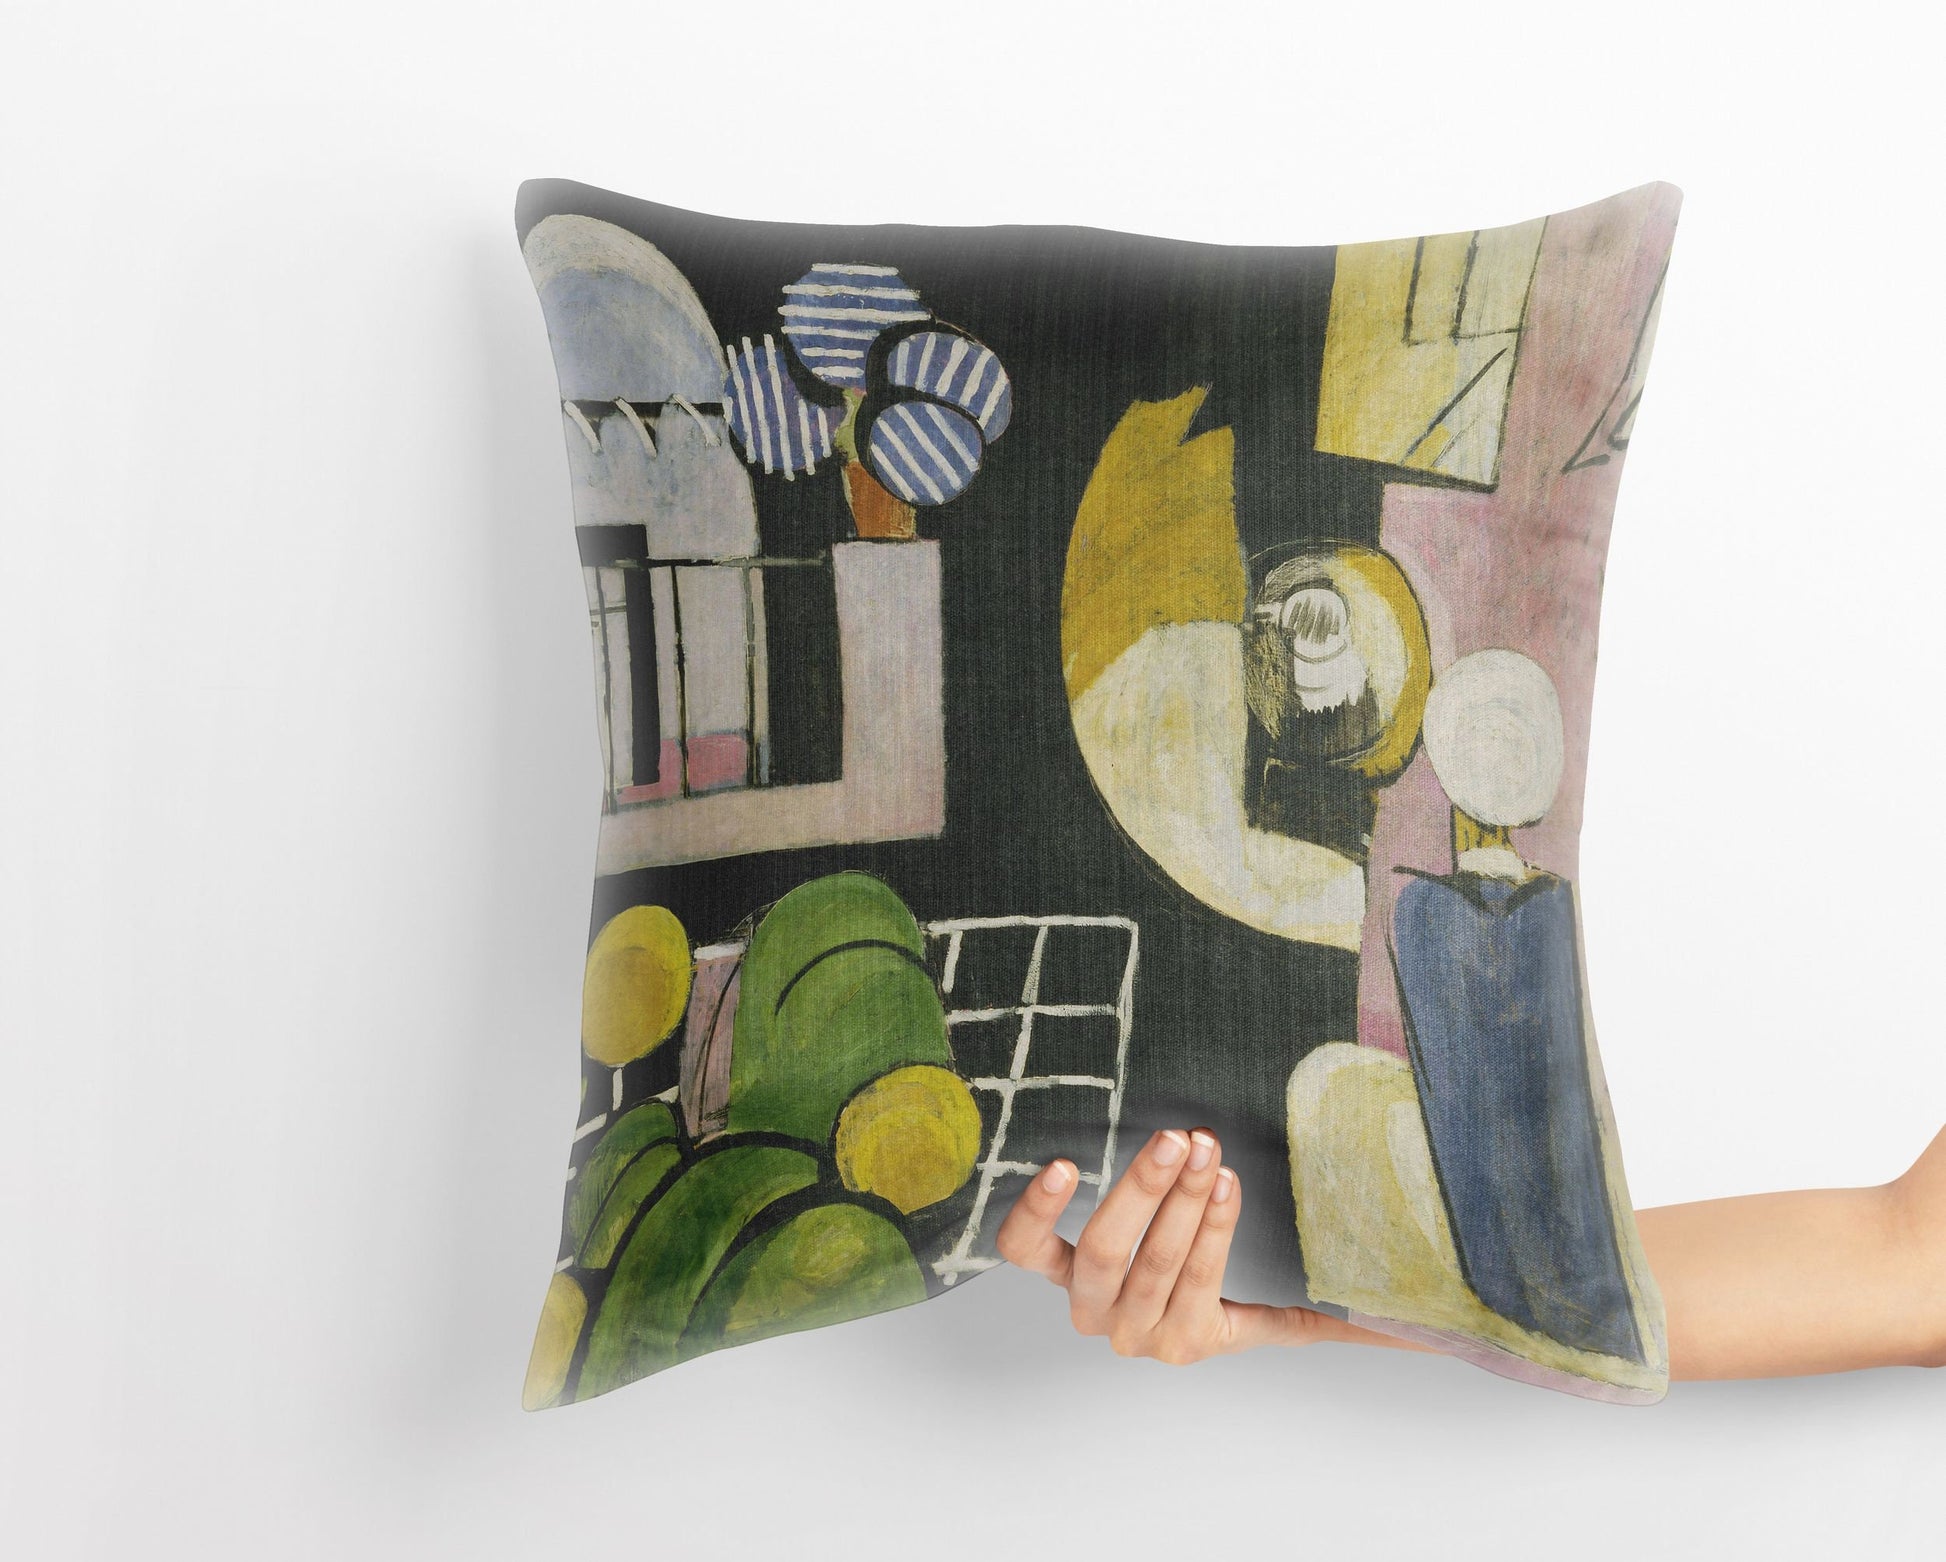 Henri Matisse Famous Art, Tapestry Pillows, Abstract Throw Pillow Cover, Art Pillow, Square Pillow, Housewarming Gift, Abstract Decor